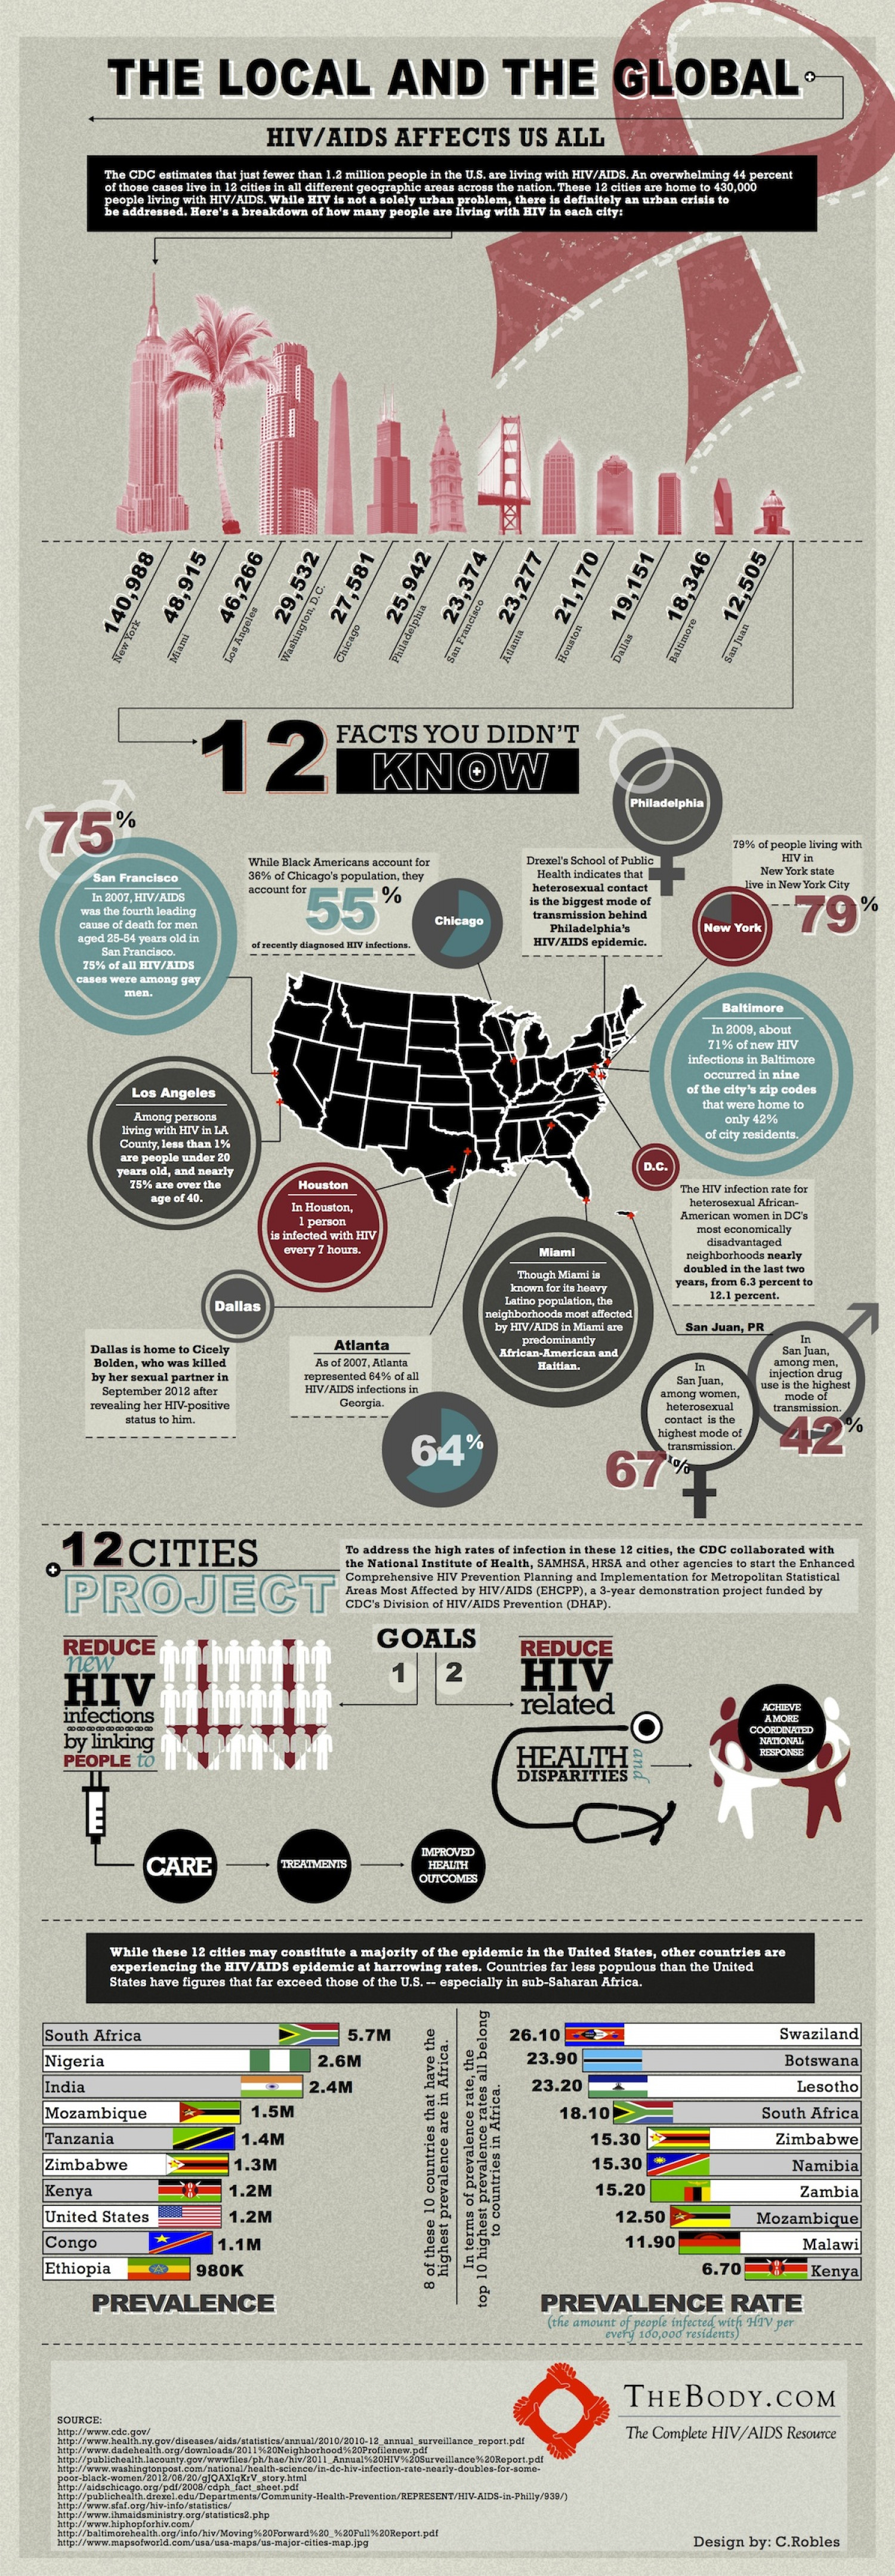 HIV/AIDS - The Local and the Global  Infographic